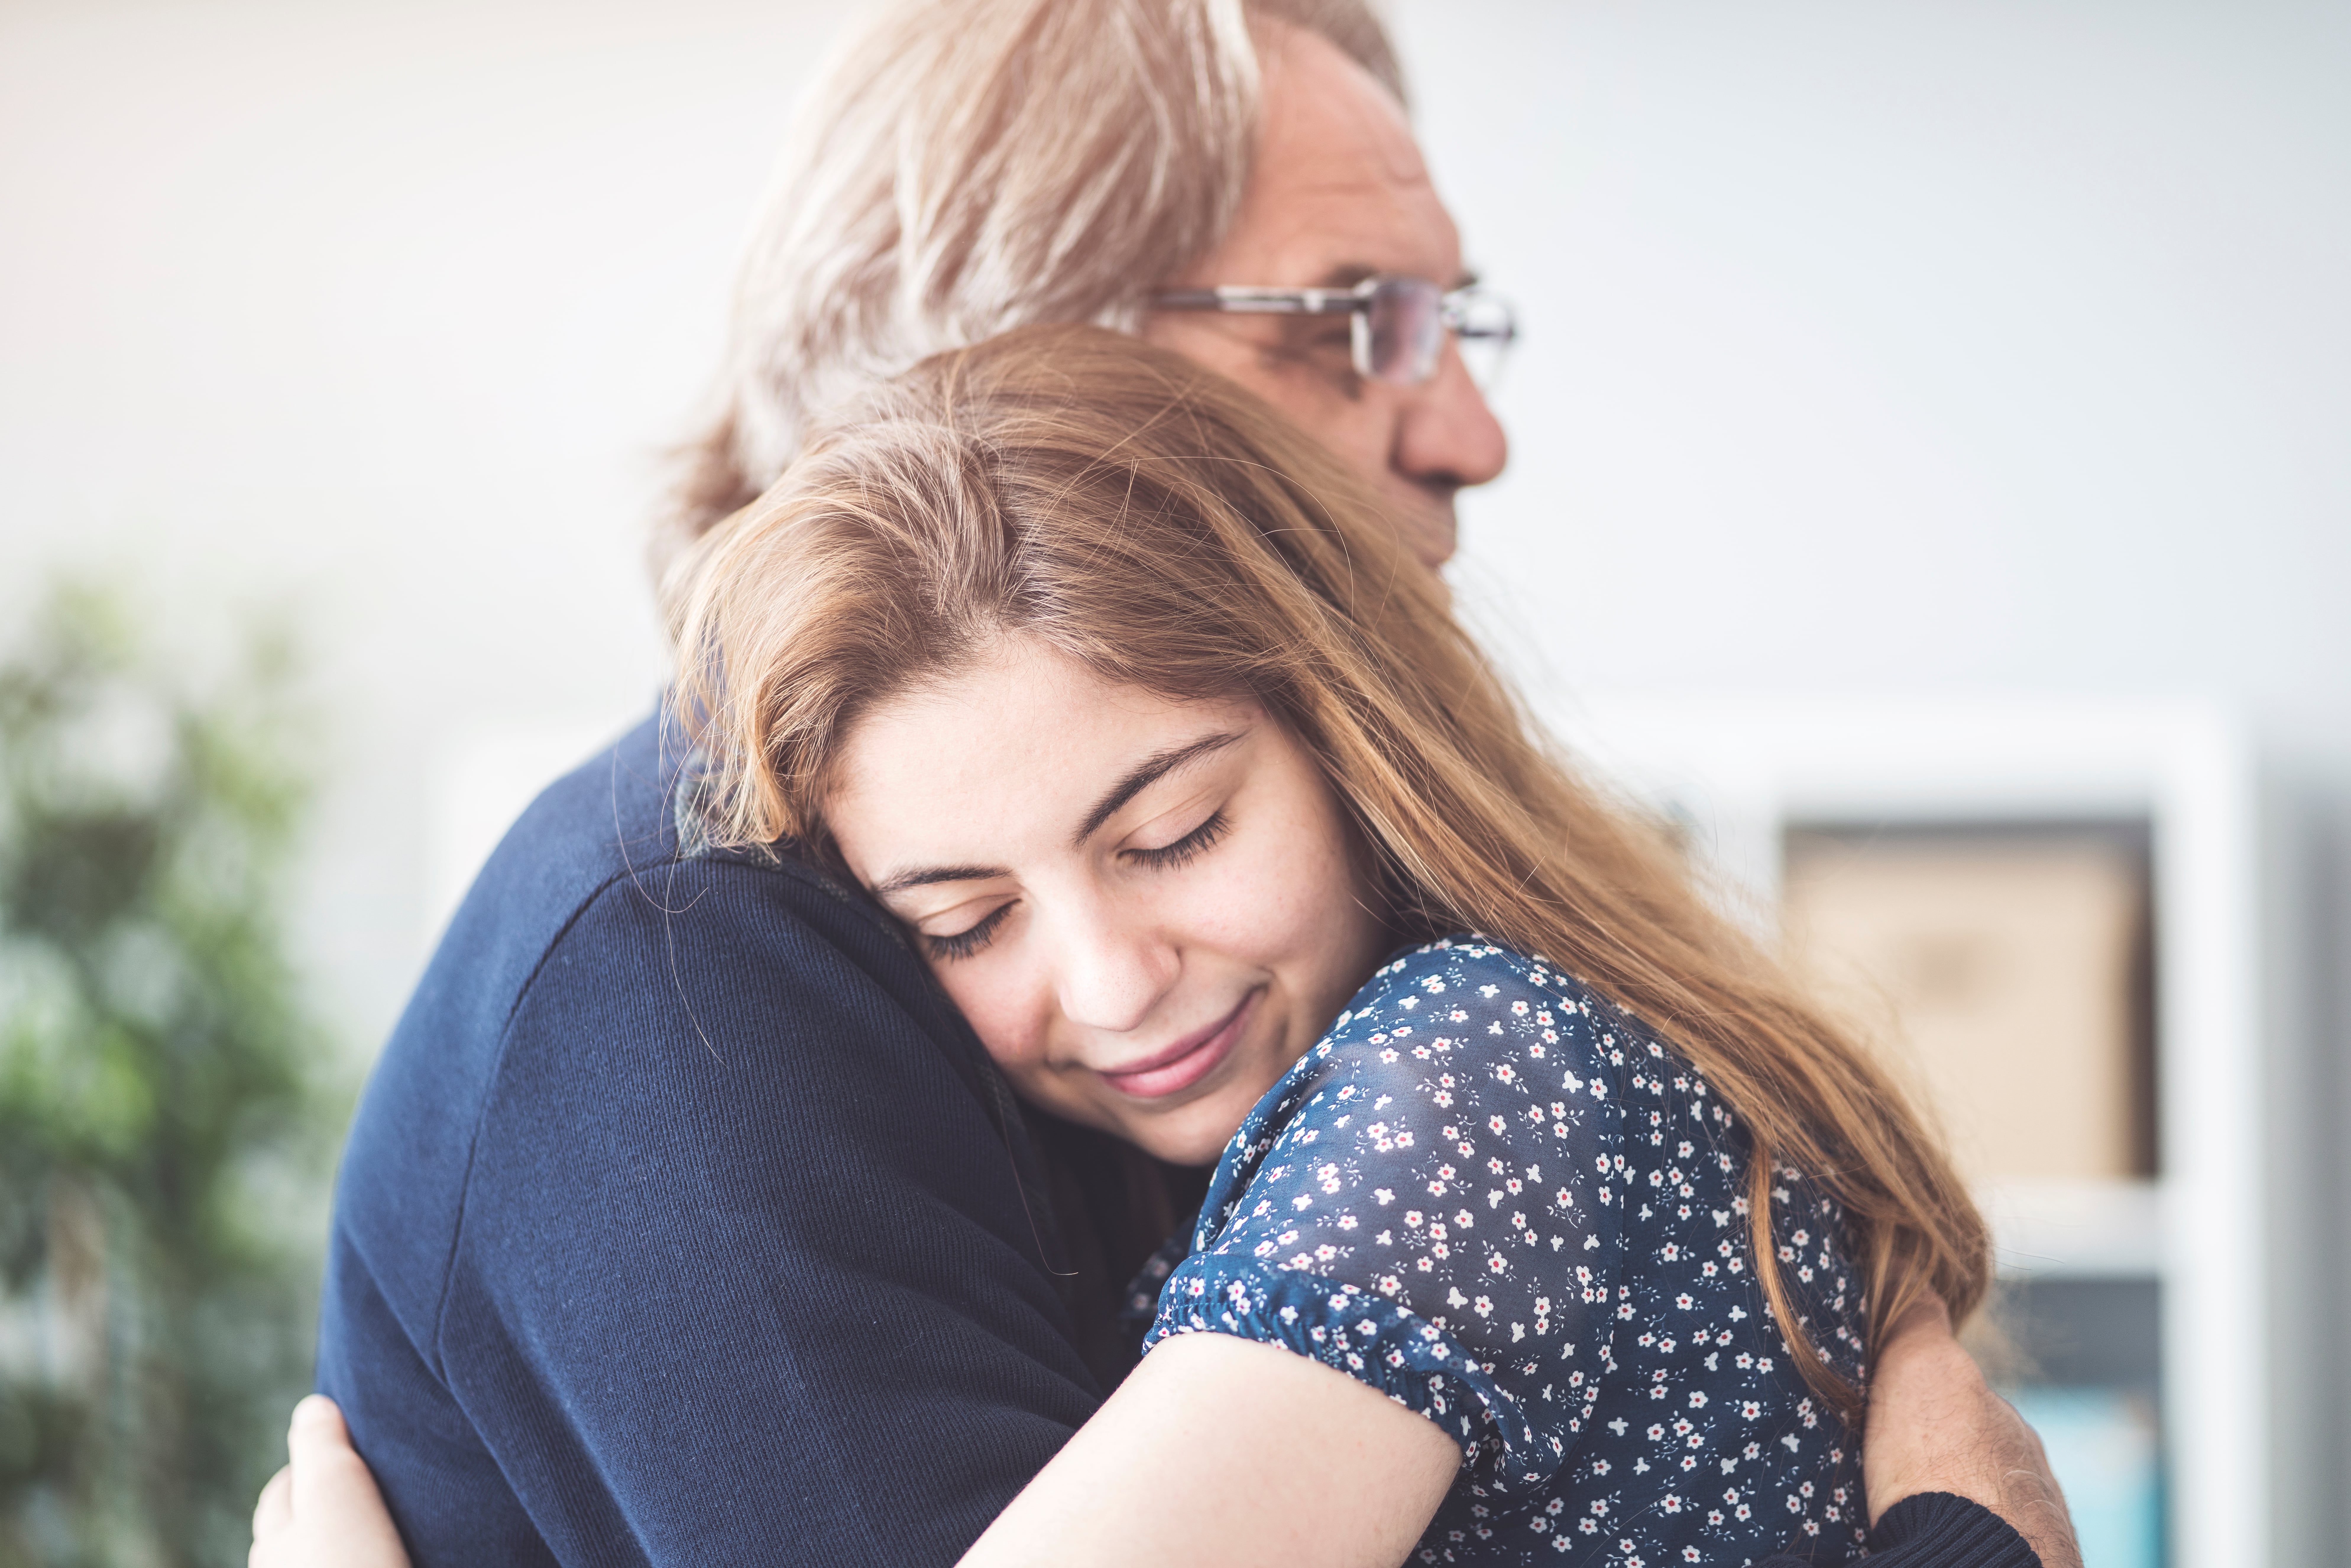 A young woman hugging her father | Source: Shutterstock